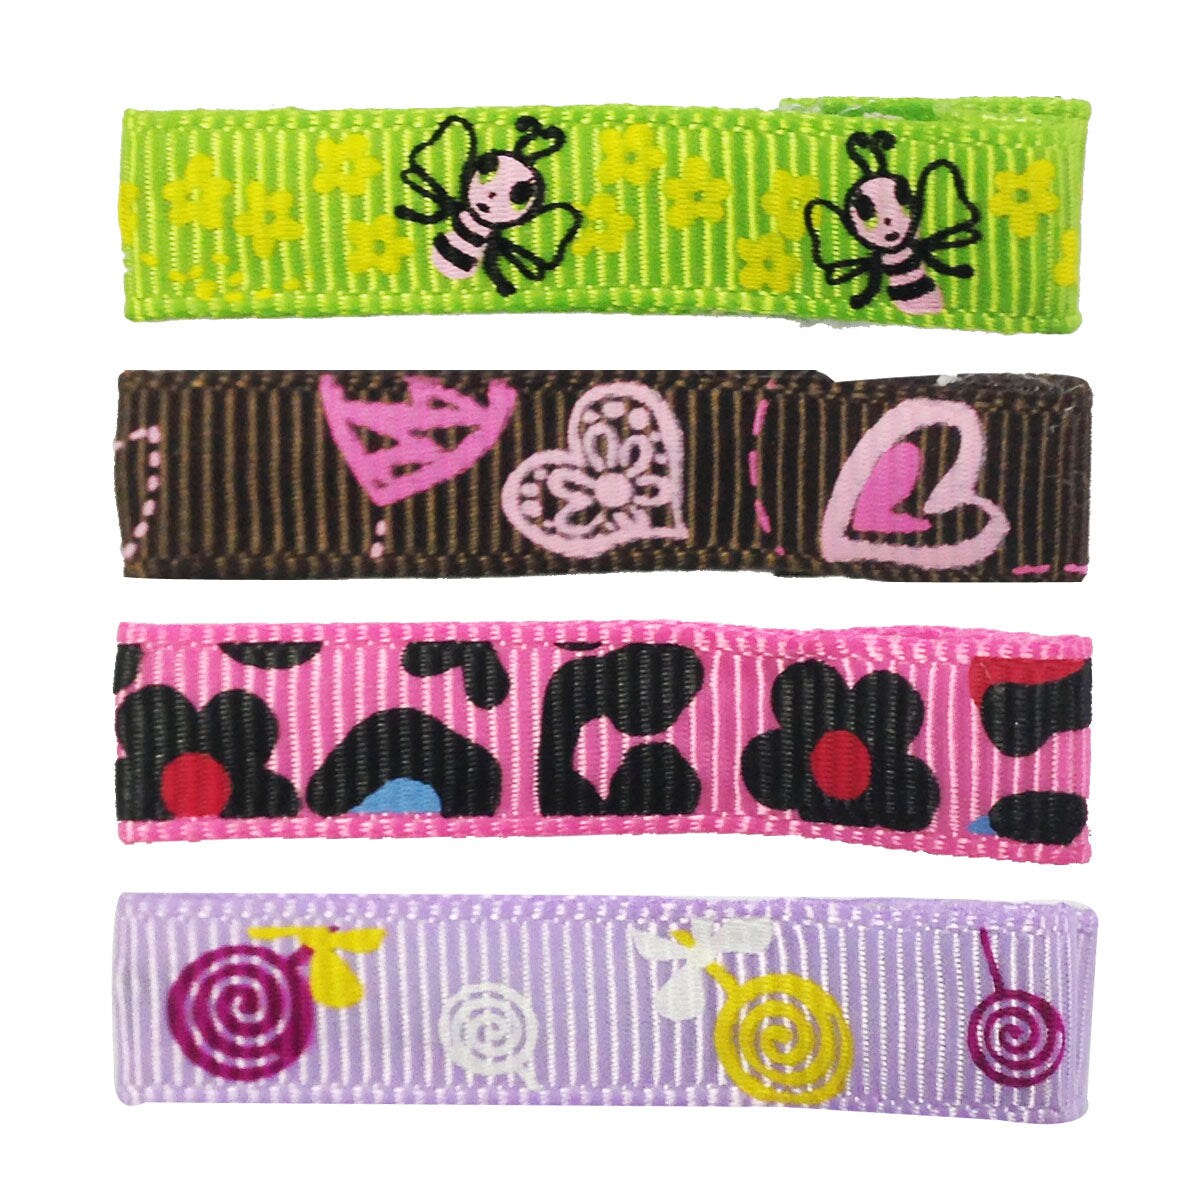 Wrapables Girls Ribbon Lined Alligator Clips (Set of 8), Hearts and Flowers